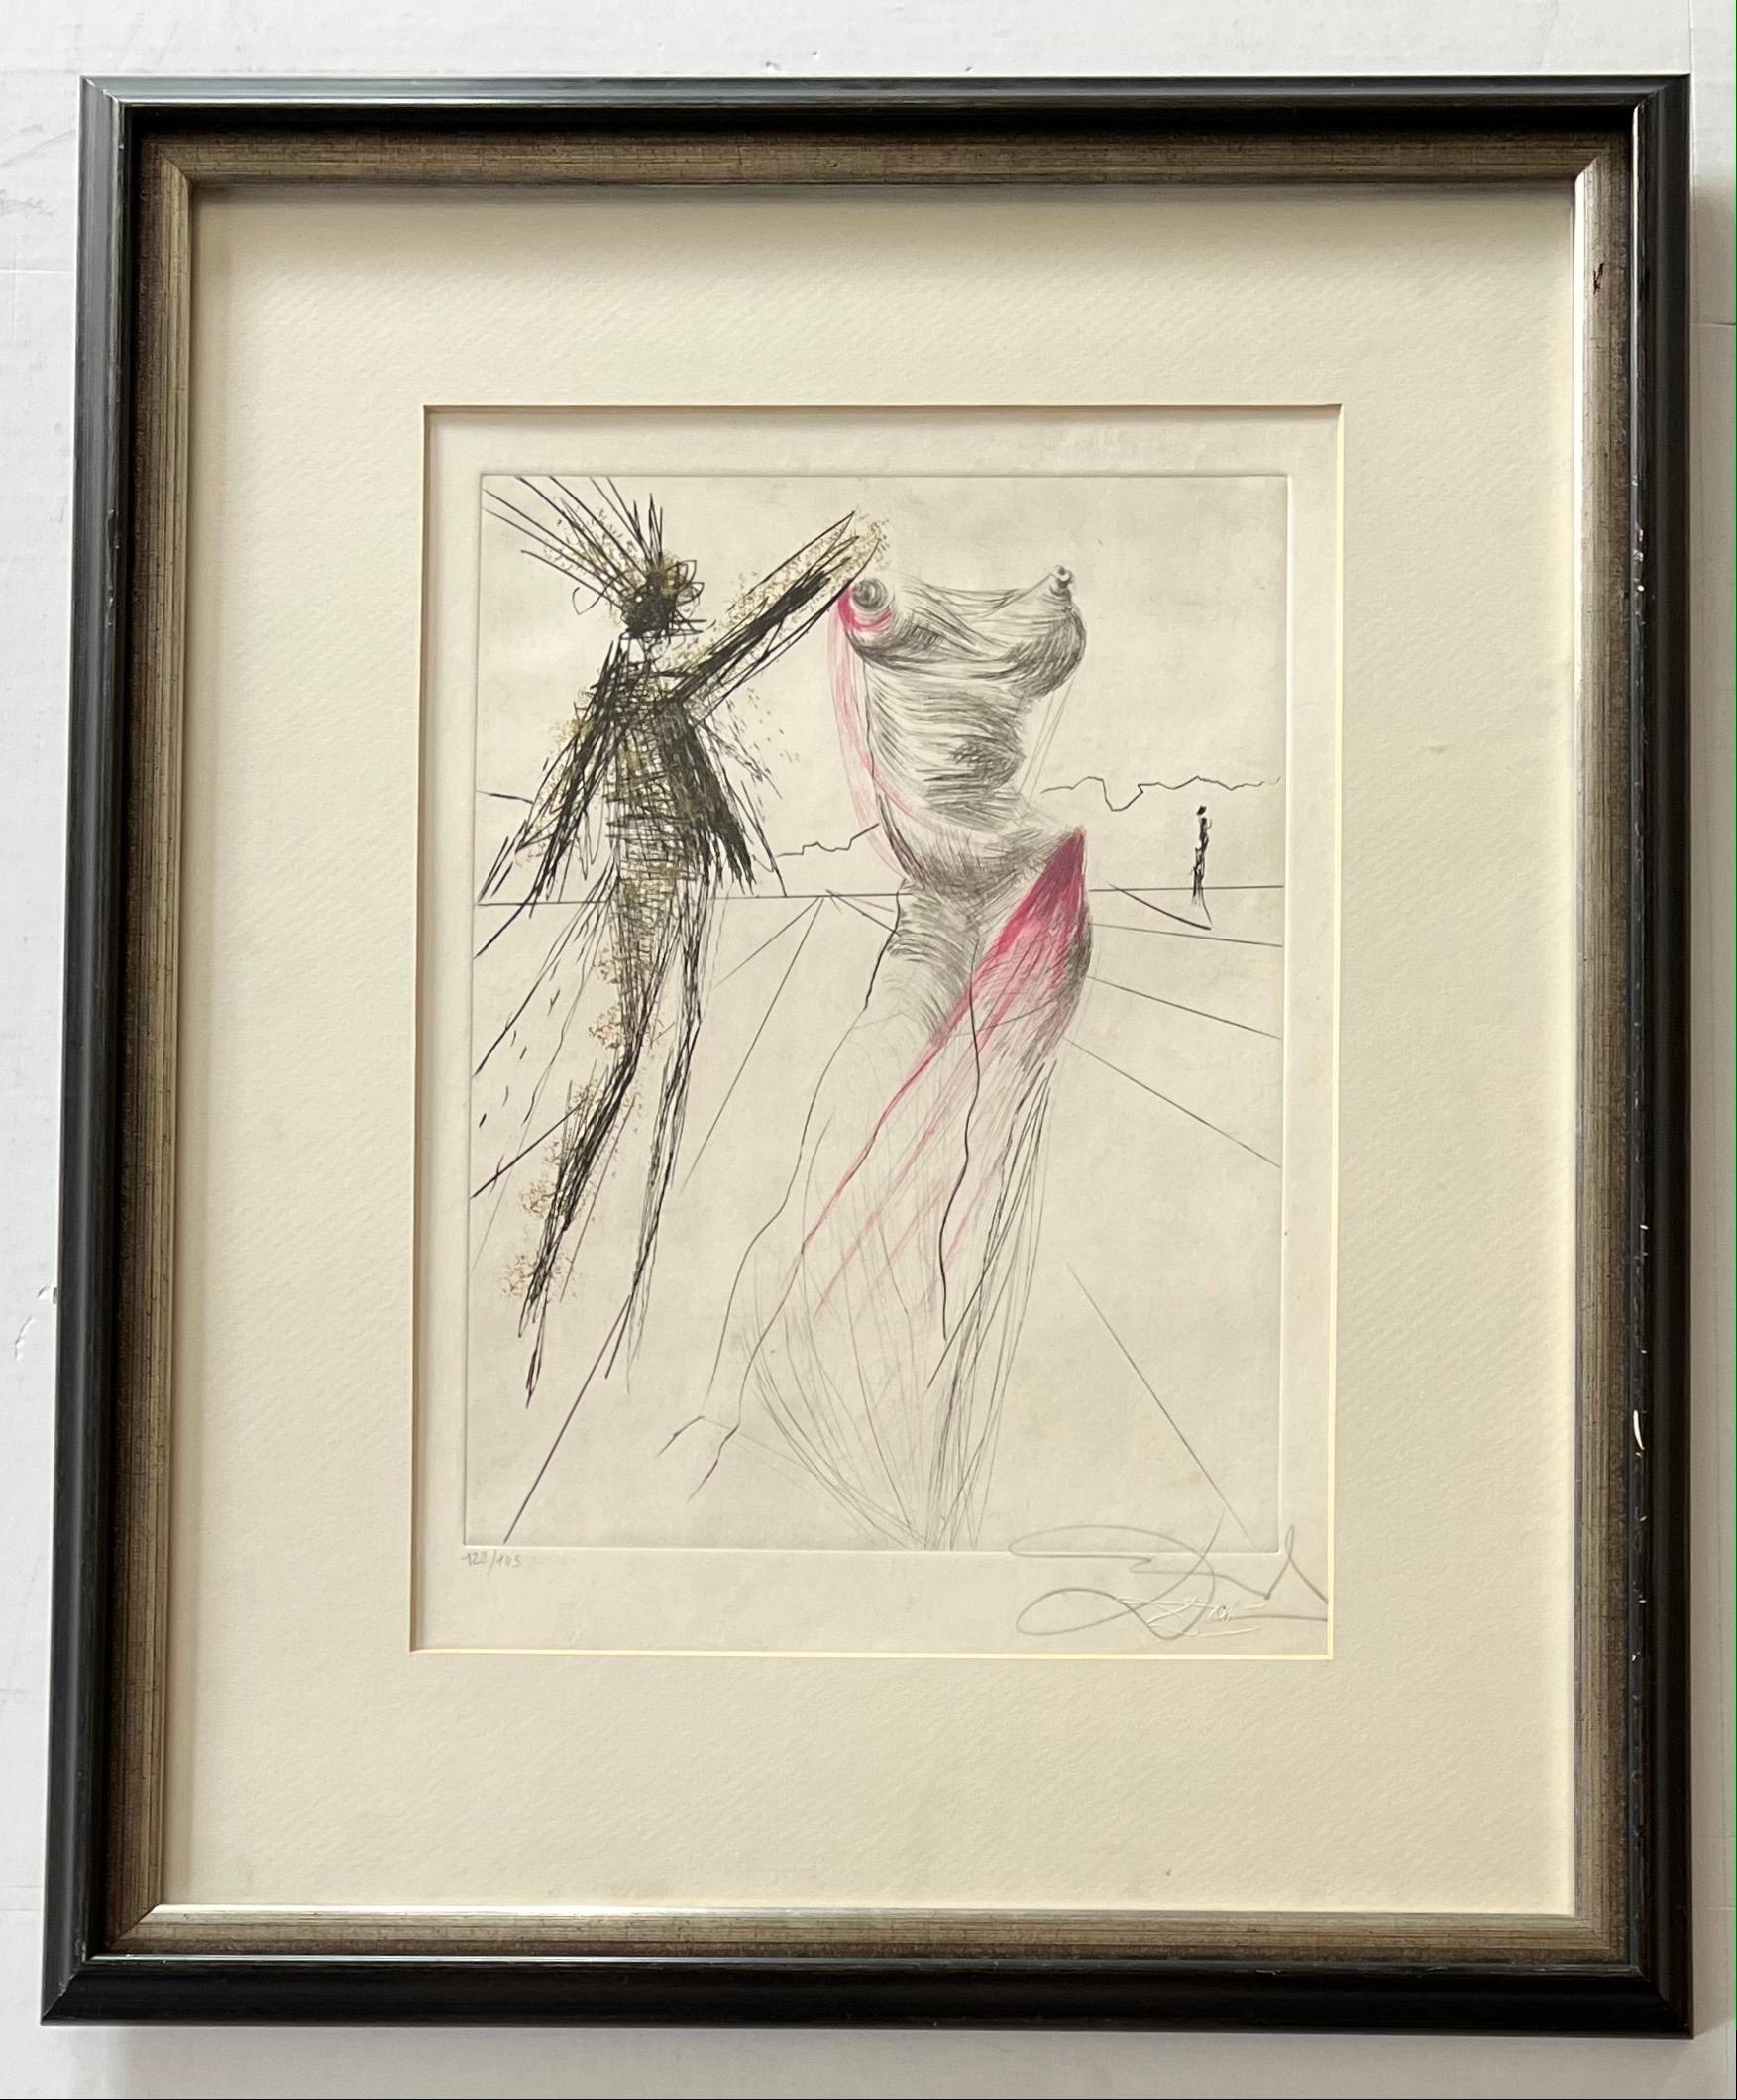  Salvador Dalí– Le Buste ( The Bust ) – hand watercolored drypoint etching  1